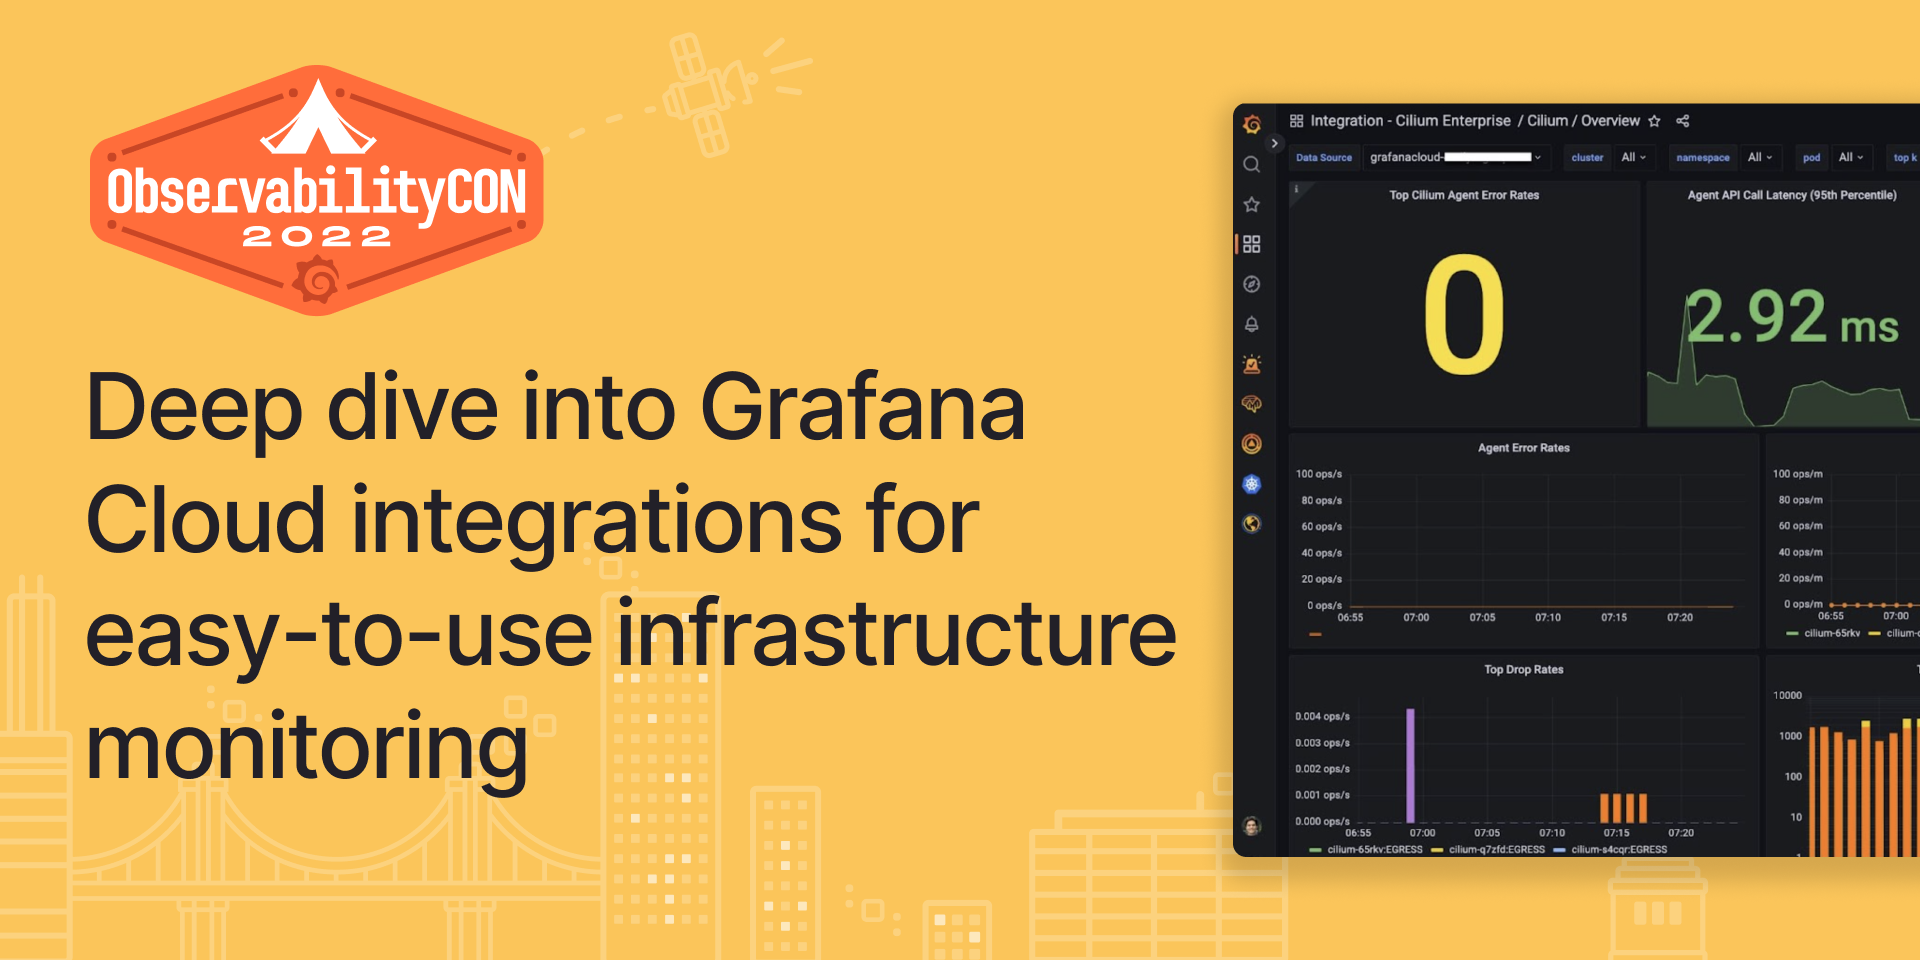 Deep dive into Grafana Cloud integrations for easy-to-use infrastructure monitoring